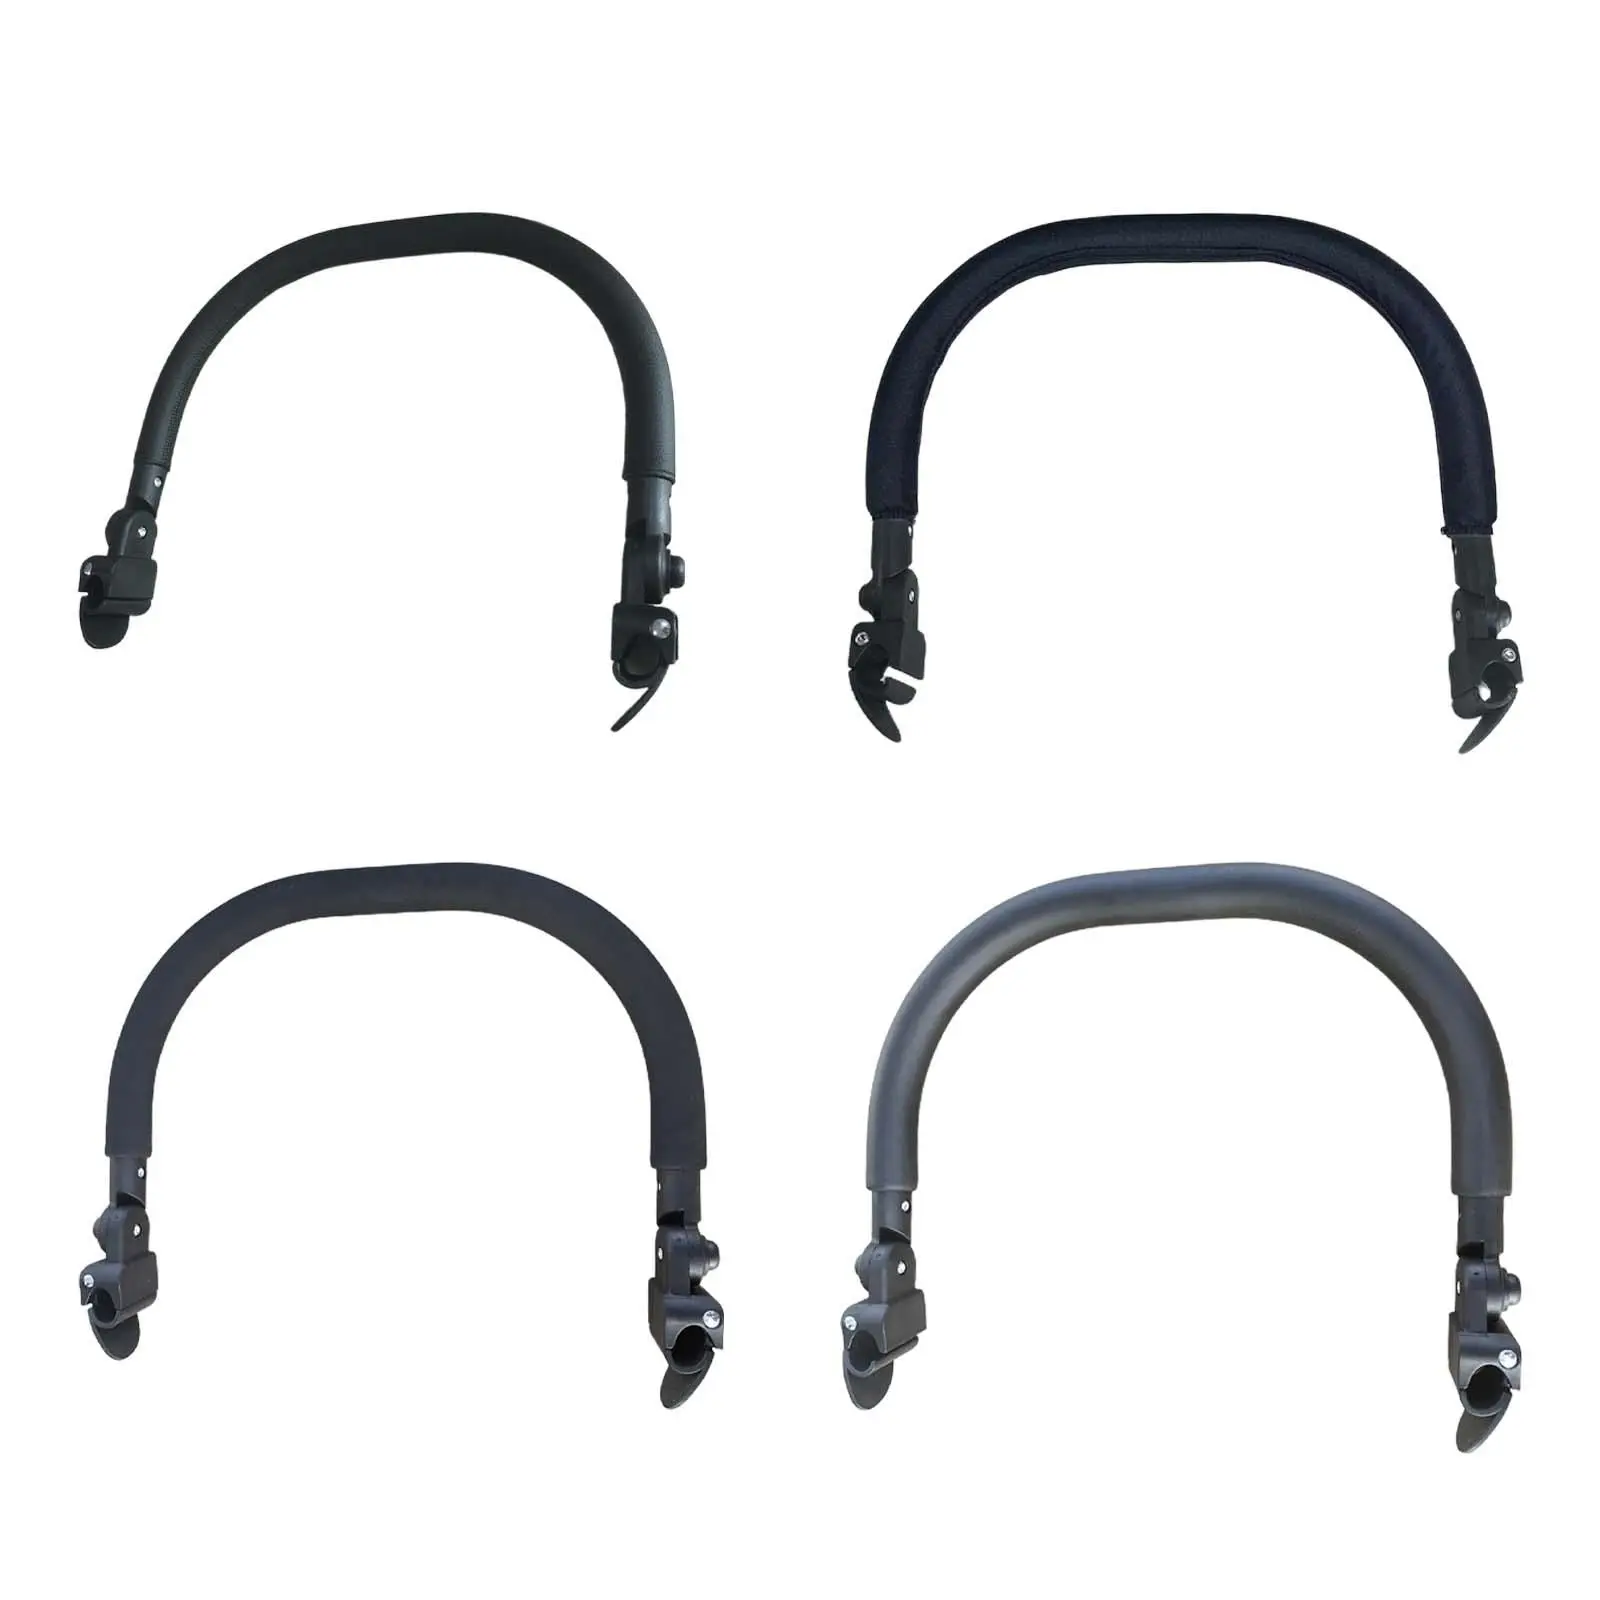 Pushchair Front Bars Handrail Adjustable Universal Baby Stroller Handle for Trolley Baby Carriages Pushchair Crossbar Accs